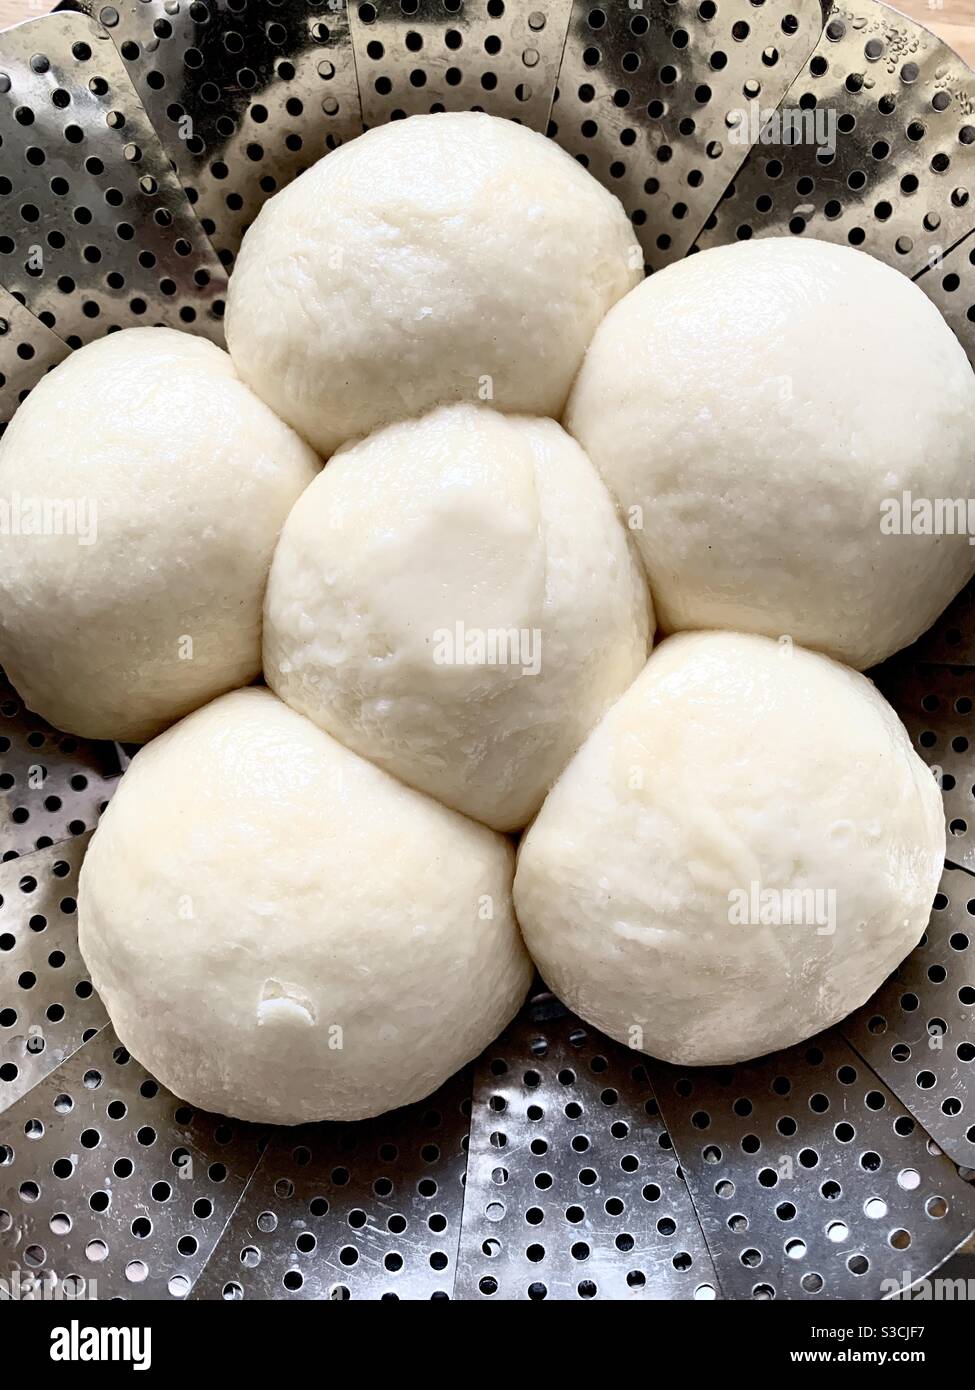 Side dish dumplings made of yeast dough and cooked in vapour. Stock Photo